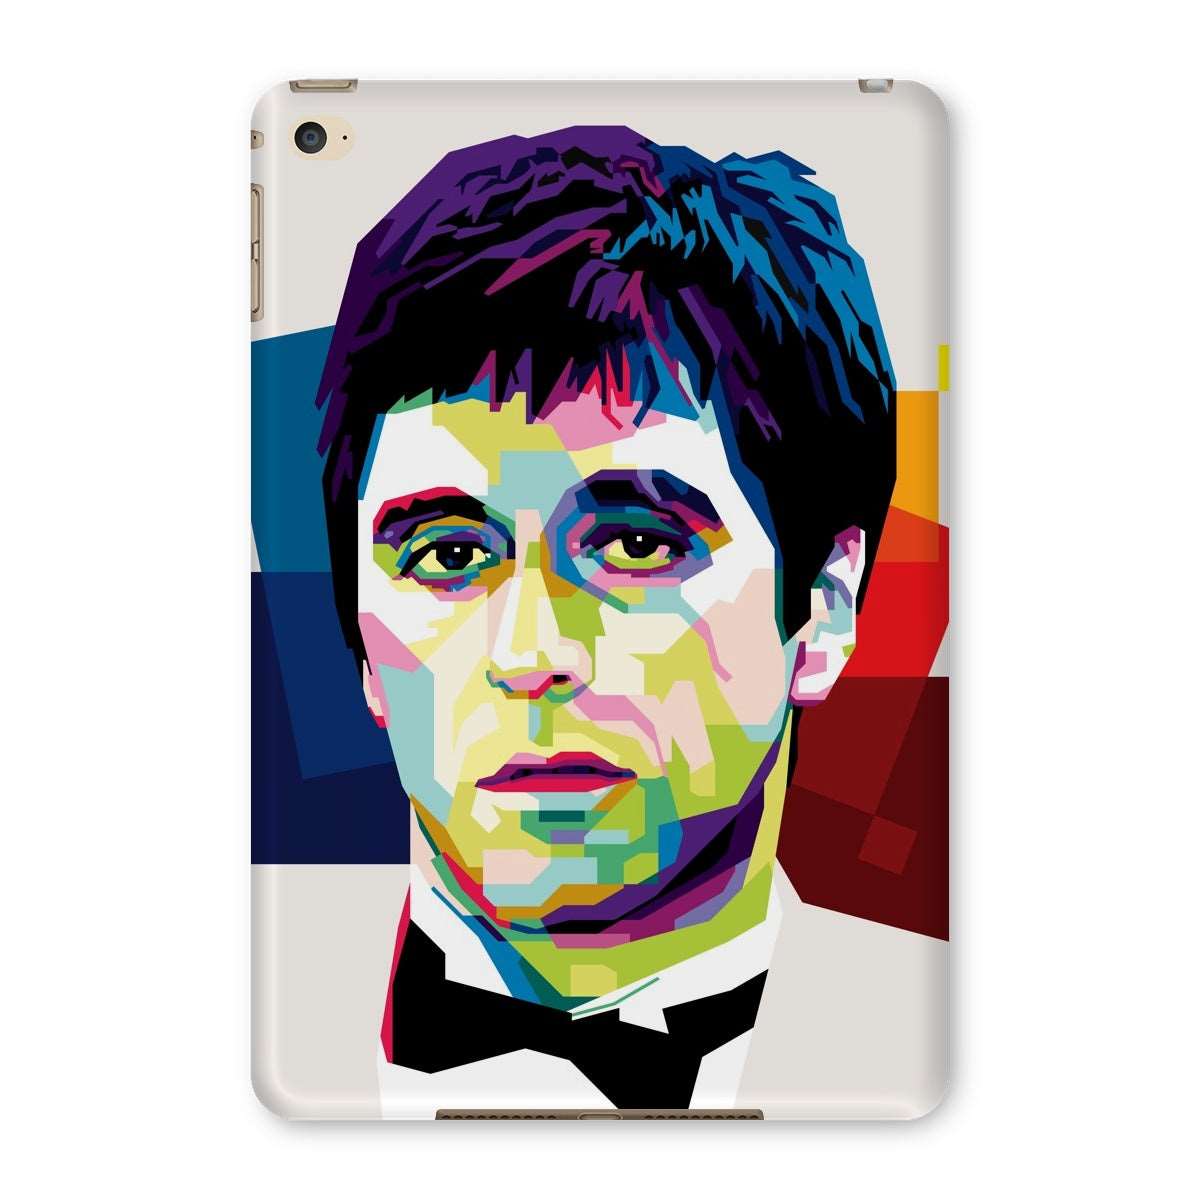 AL PACINO - SCARFACE TUX Tablet Cases